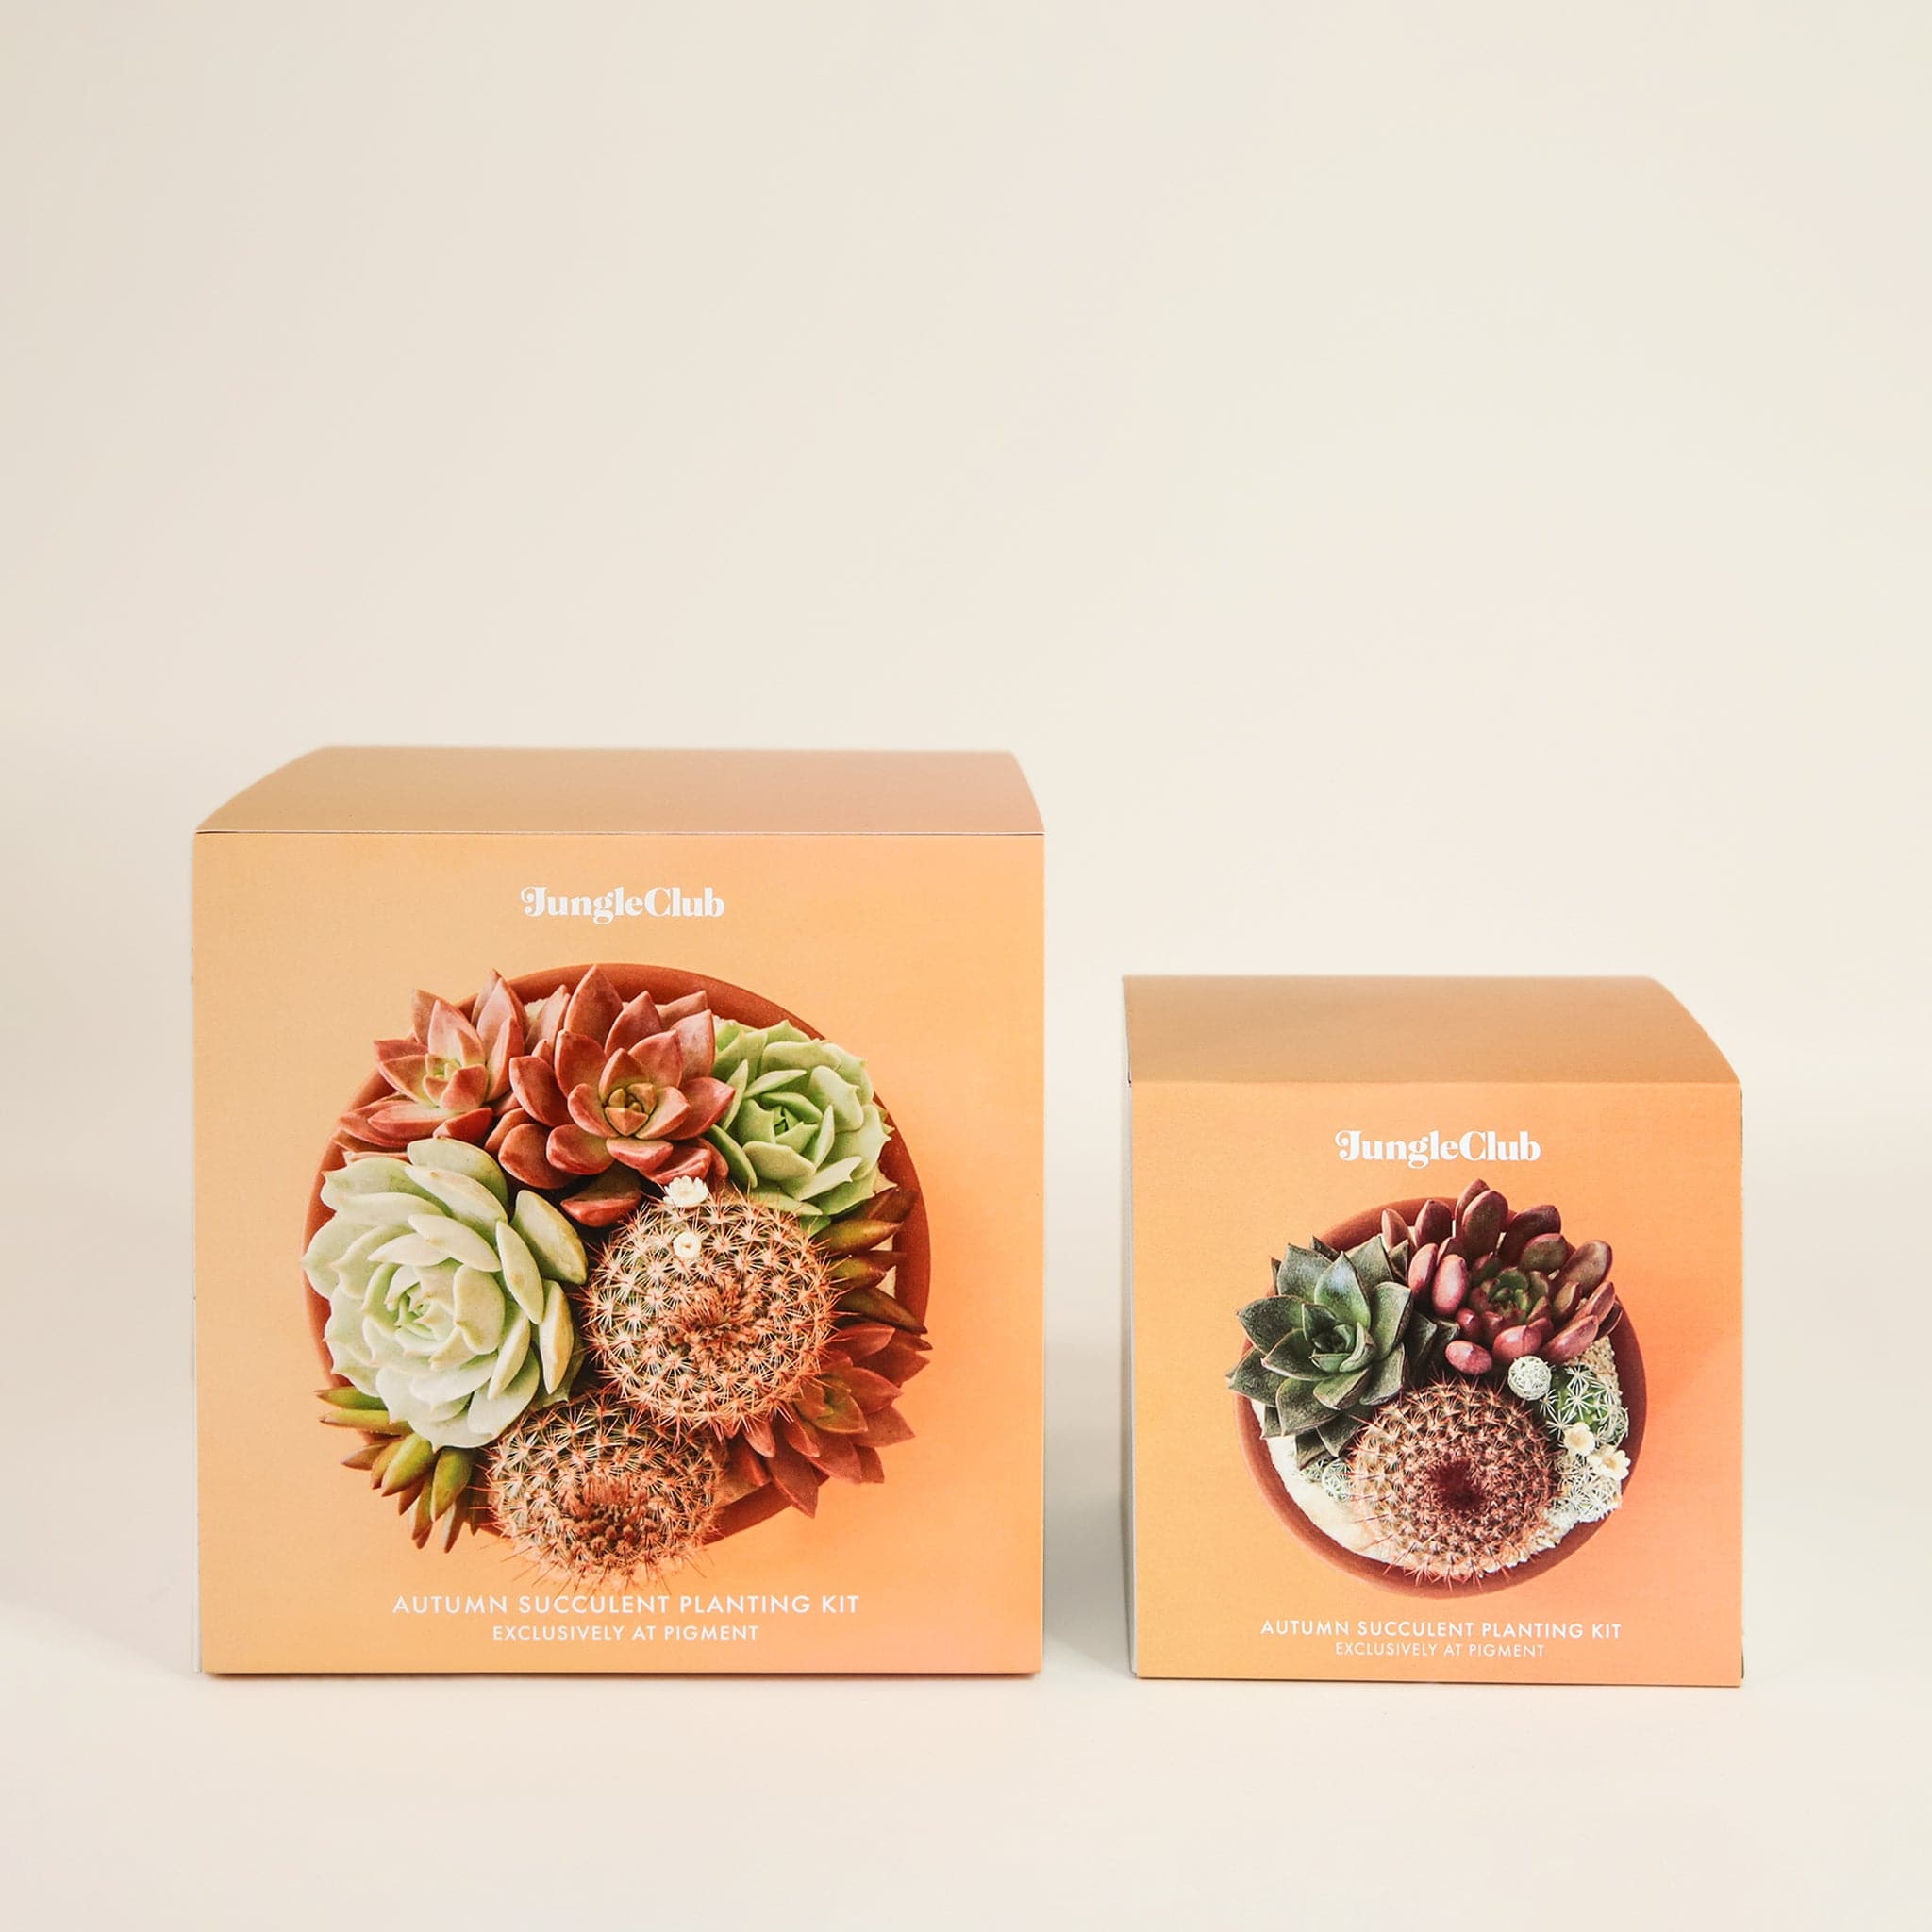 Two boxed planting kits. The box to the left is the larger of the two. Each box has a warm orange color and features images of potted succulent arrangements. The boxes read 'Jungle club, autumn succulent planting kit' in small white lettering.